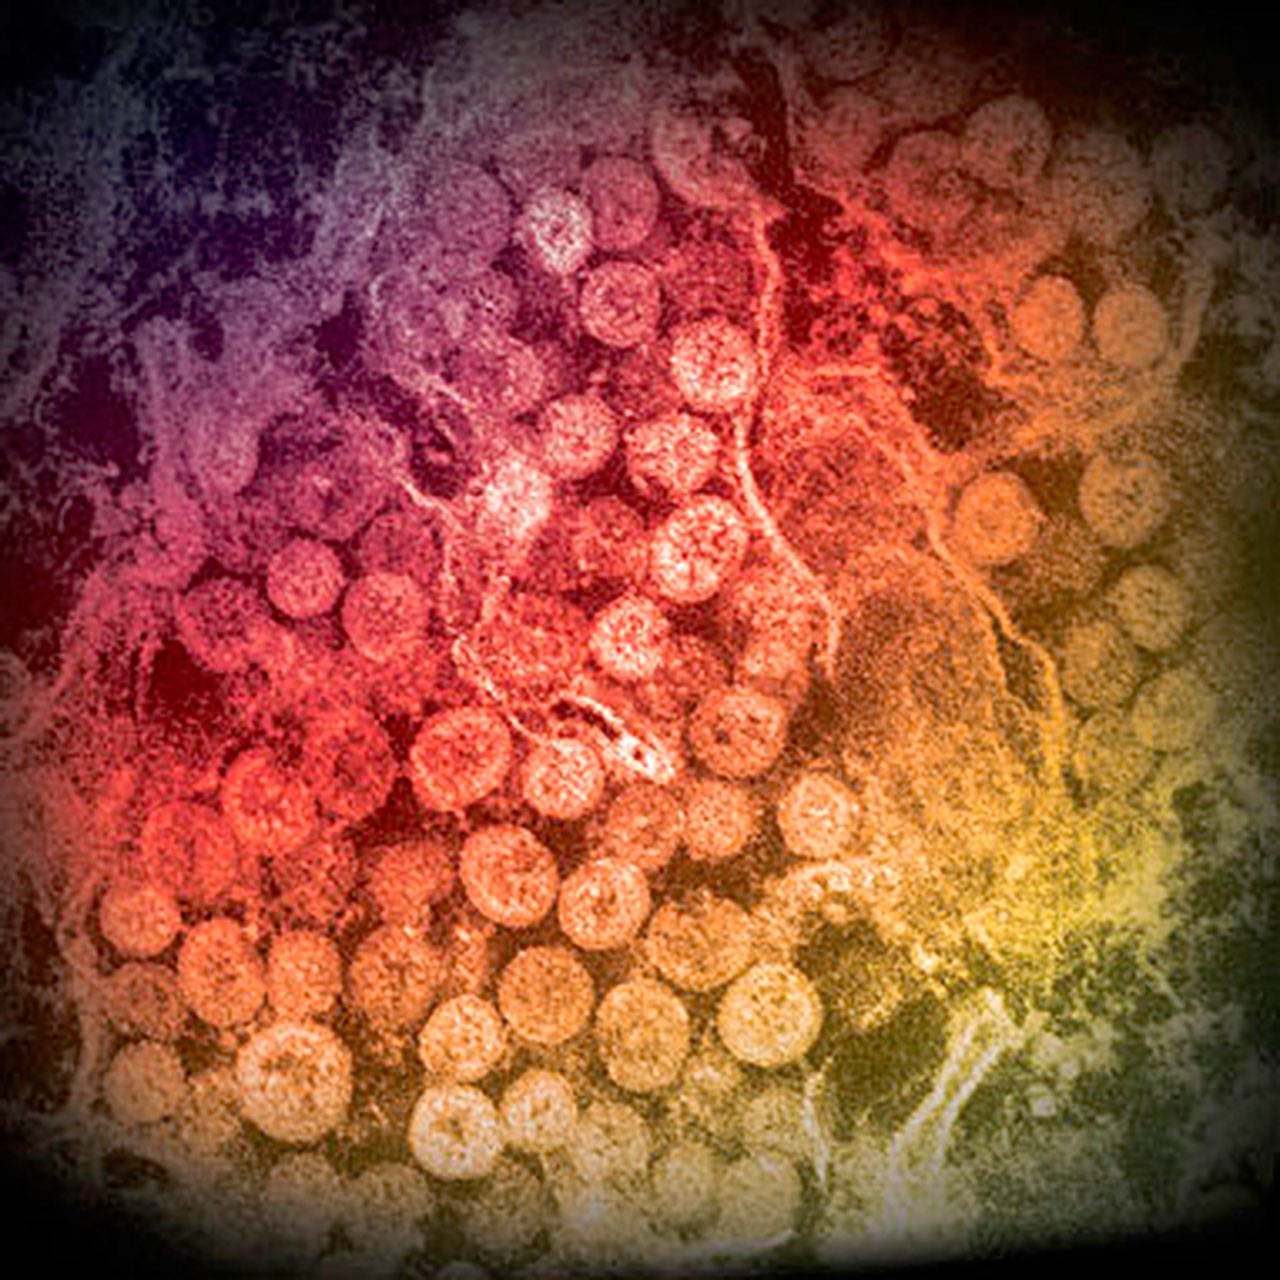 An electron micrograph of a thin section of MERS-CoV, a type of coronavirus similar to the new 2019-nCoV, showing the spherical particles within the cytoplasm of an infected cell. (Cynthia Goldsmith/Azaibi Tamin)